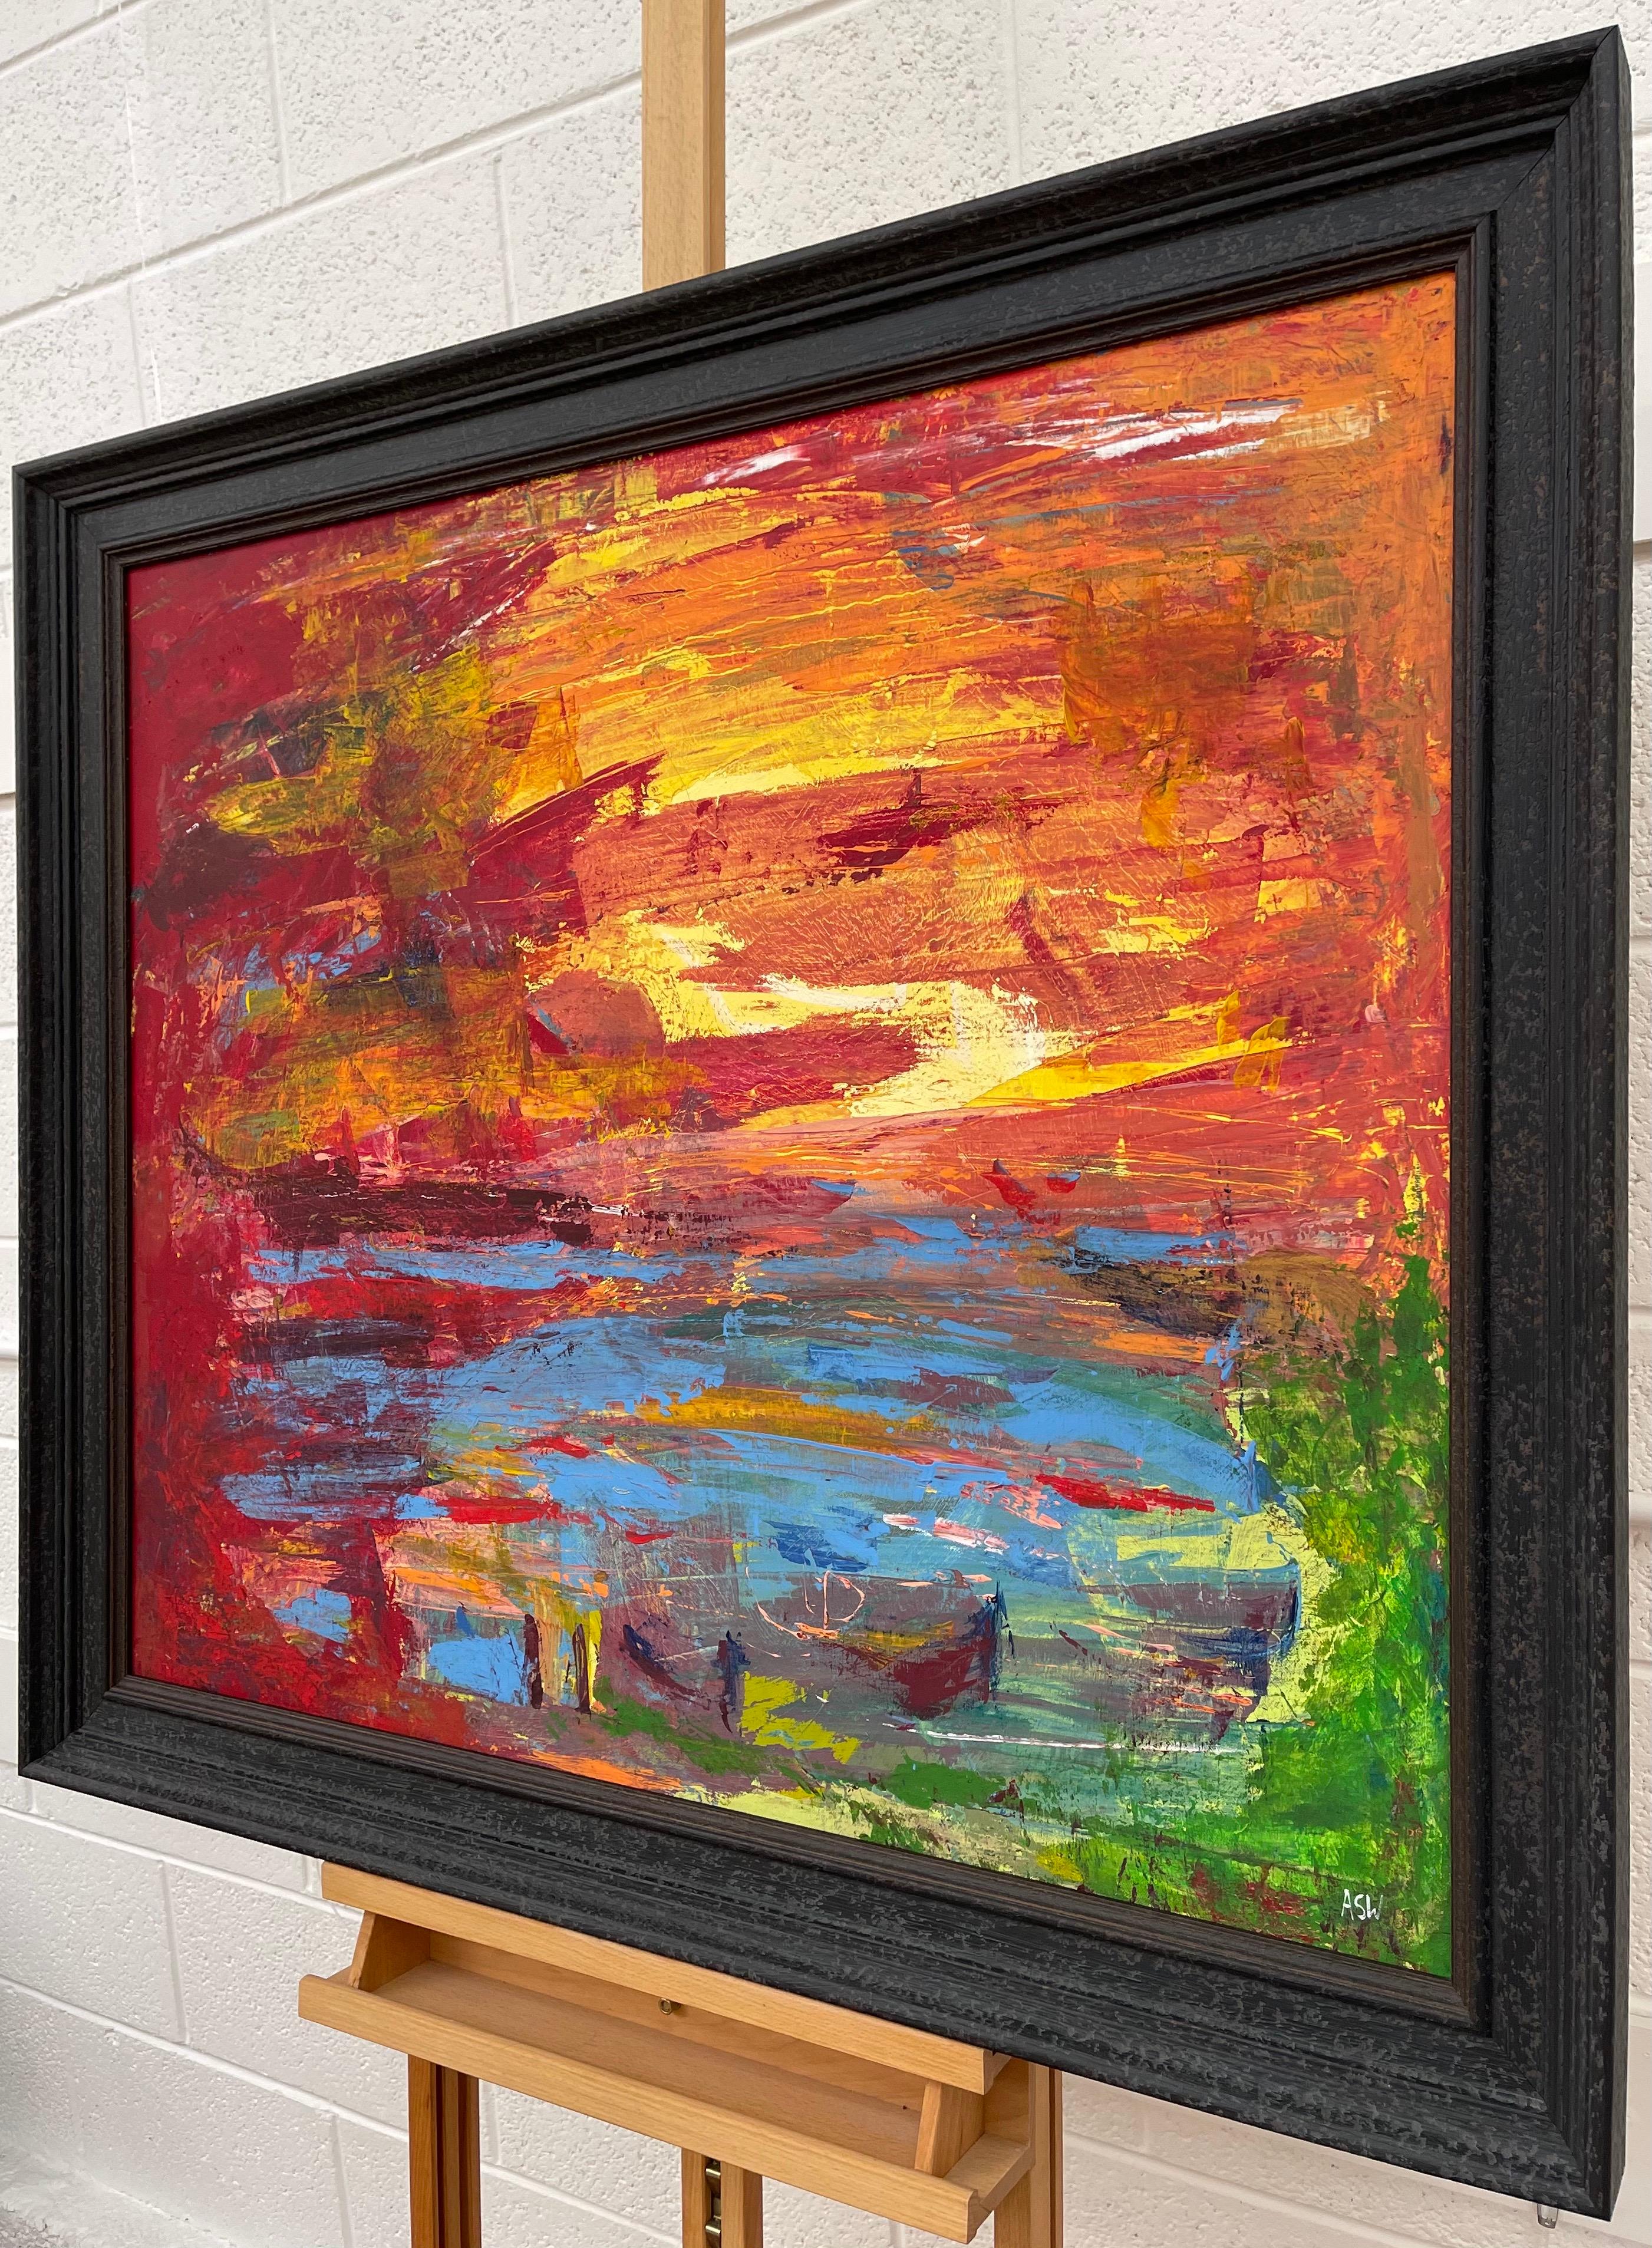 Abstract Blue Orange & Red Lake Sunset Landscape by Contemporary British Artist, Angela Wakefield. 

Art measures 36 x 30 inches
Frame measures 41 x 35 inches 

This painting is a rare early painting from an intense body of seminal abstract work